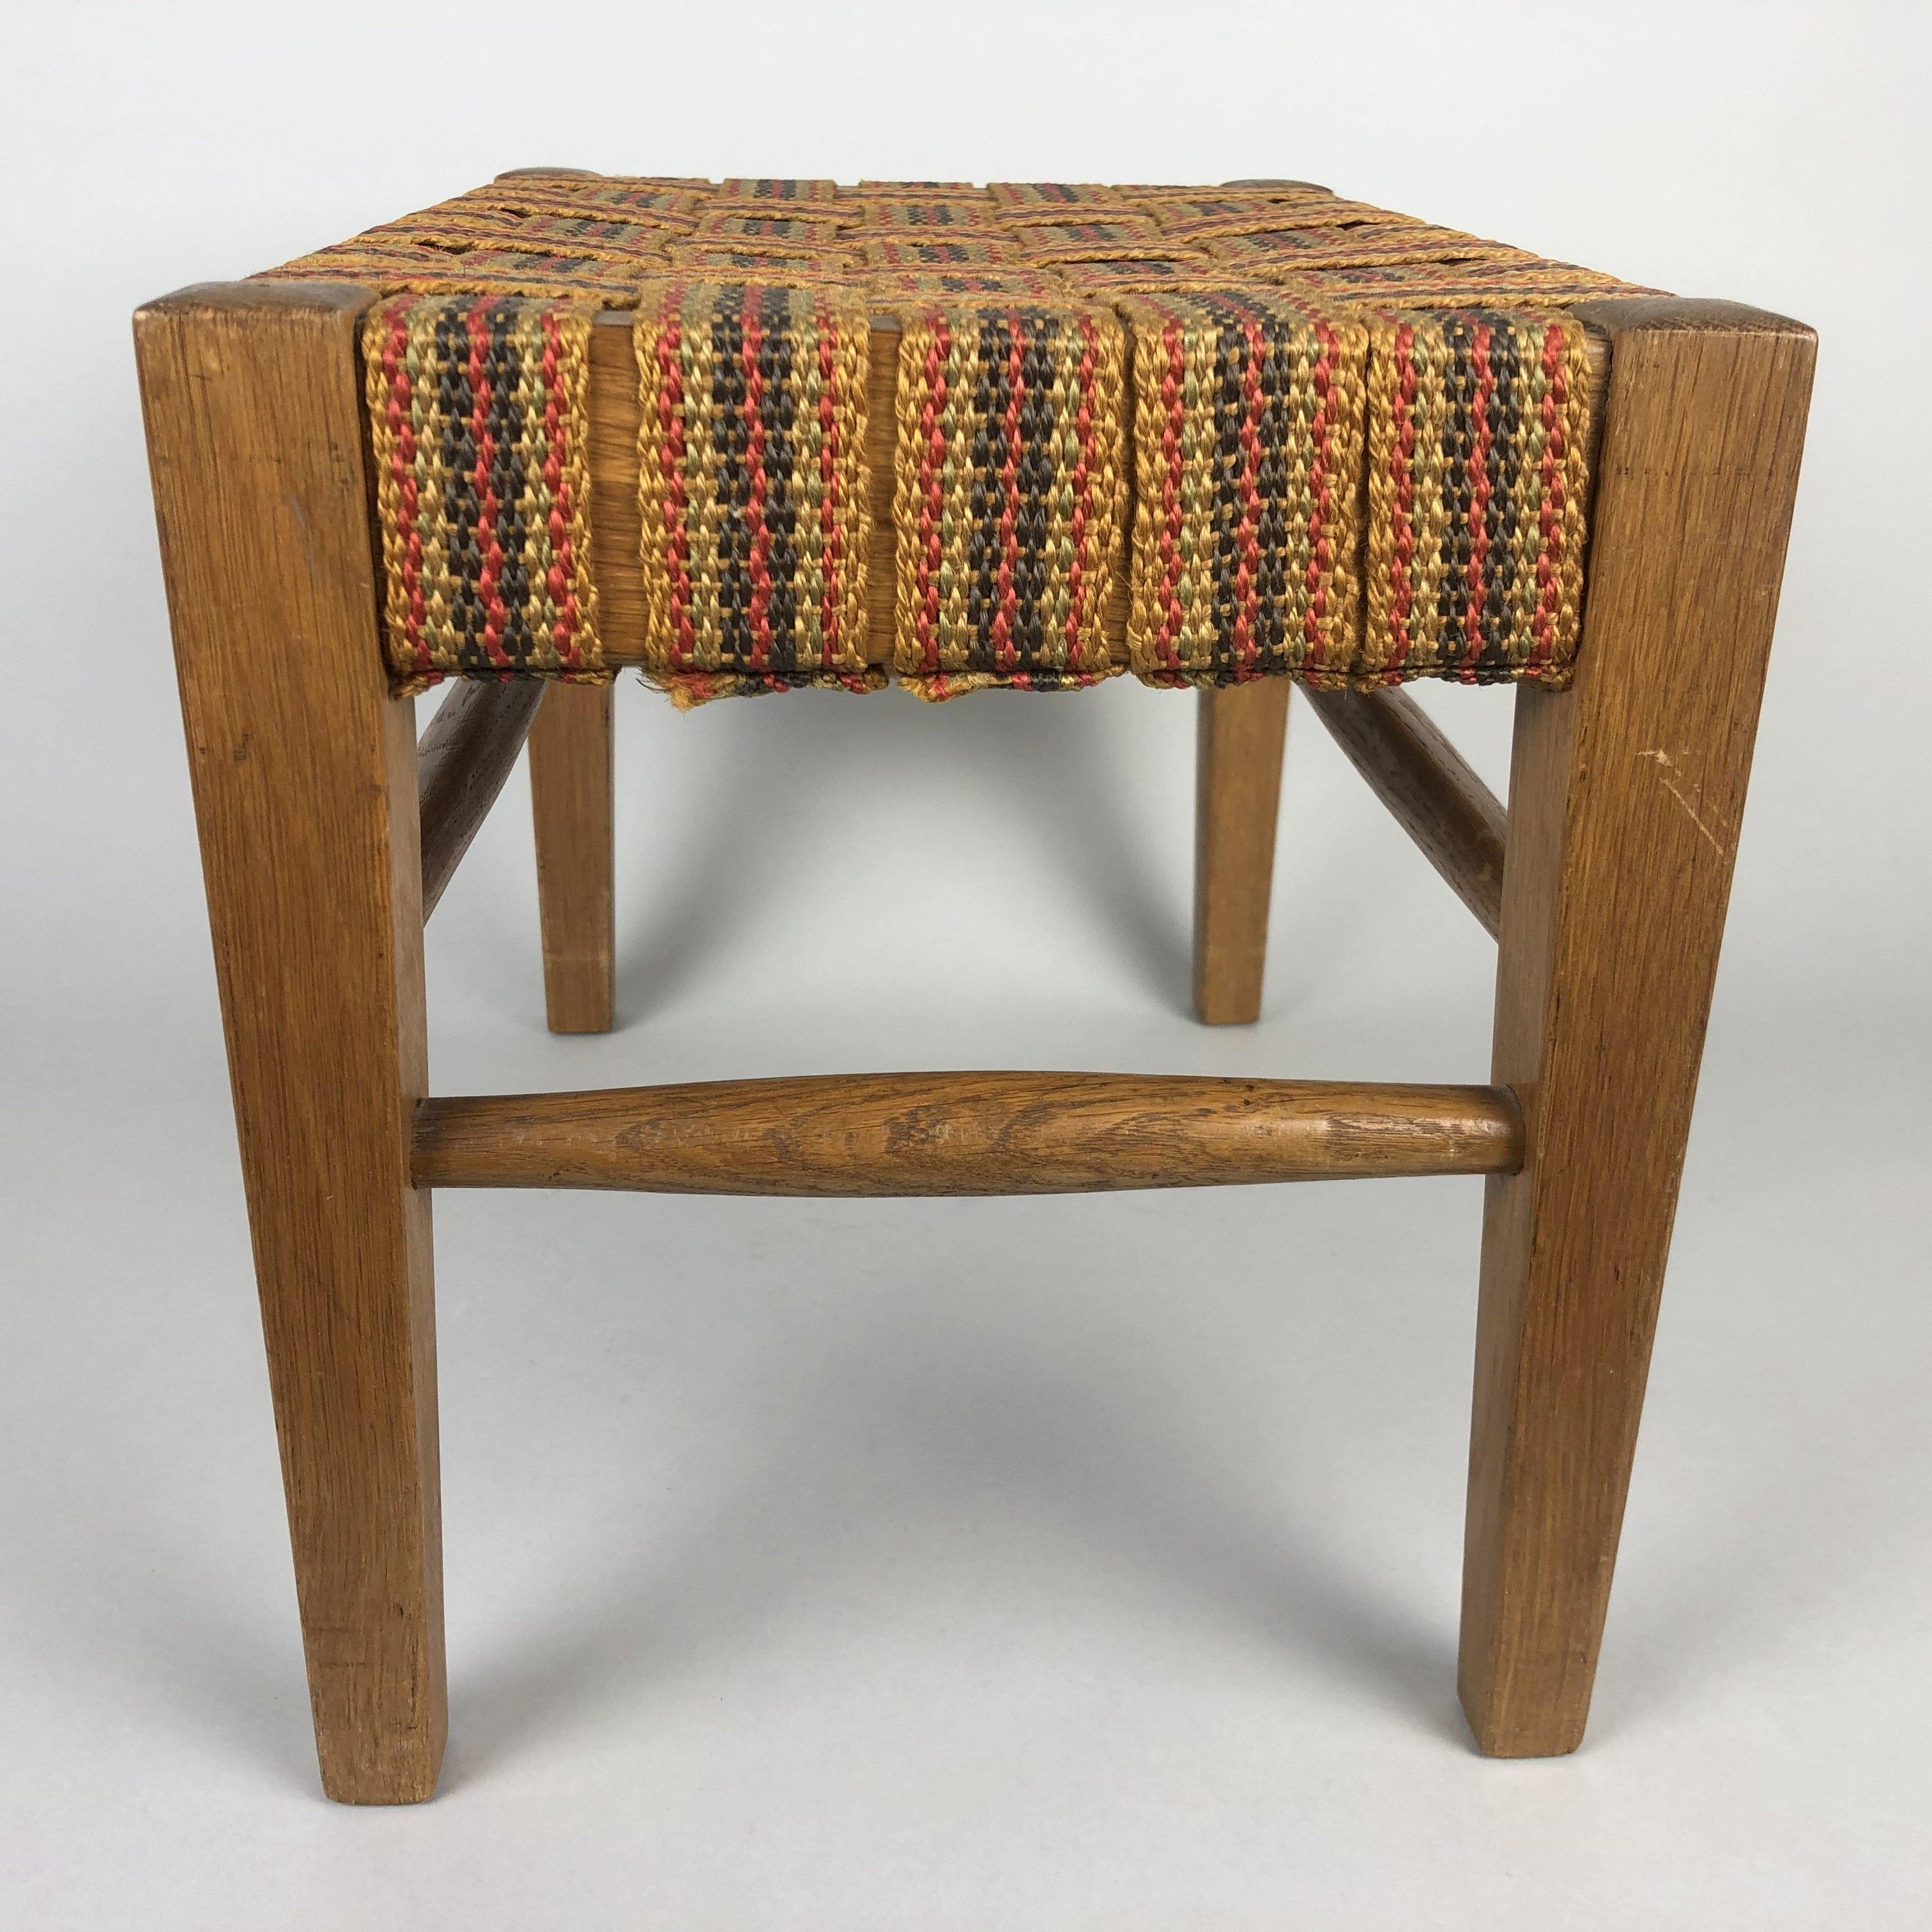 Czech Midcentury Stool or Tabouret, 1950s For Sale